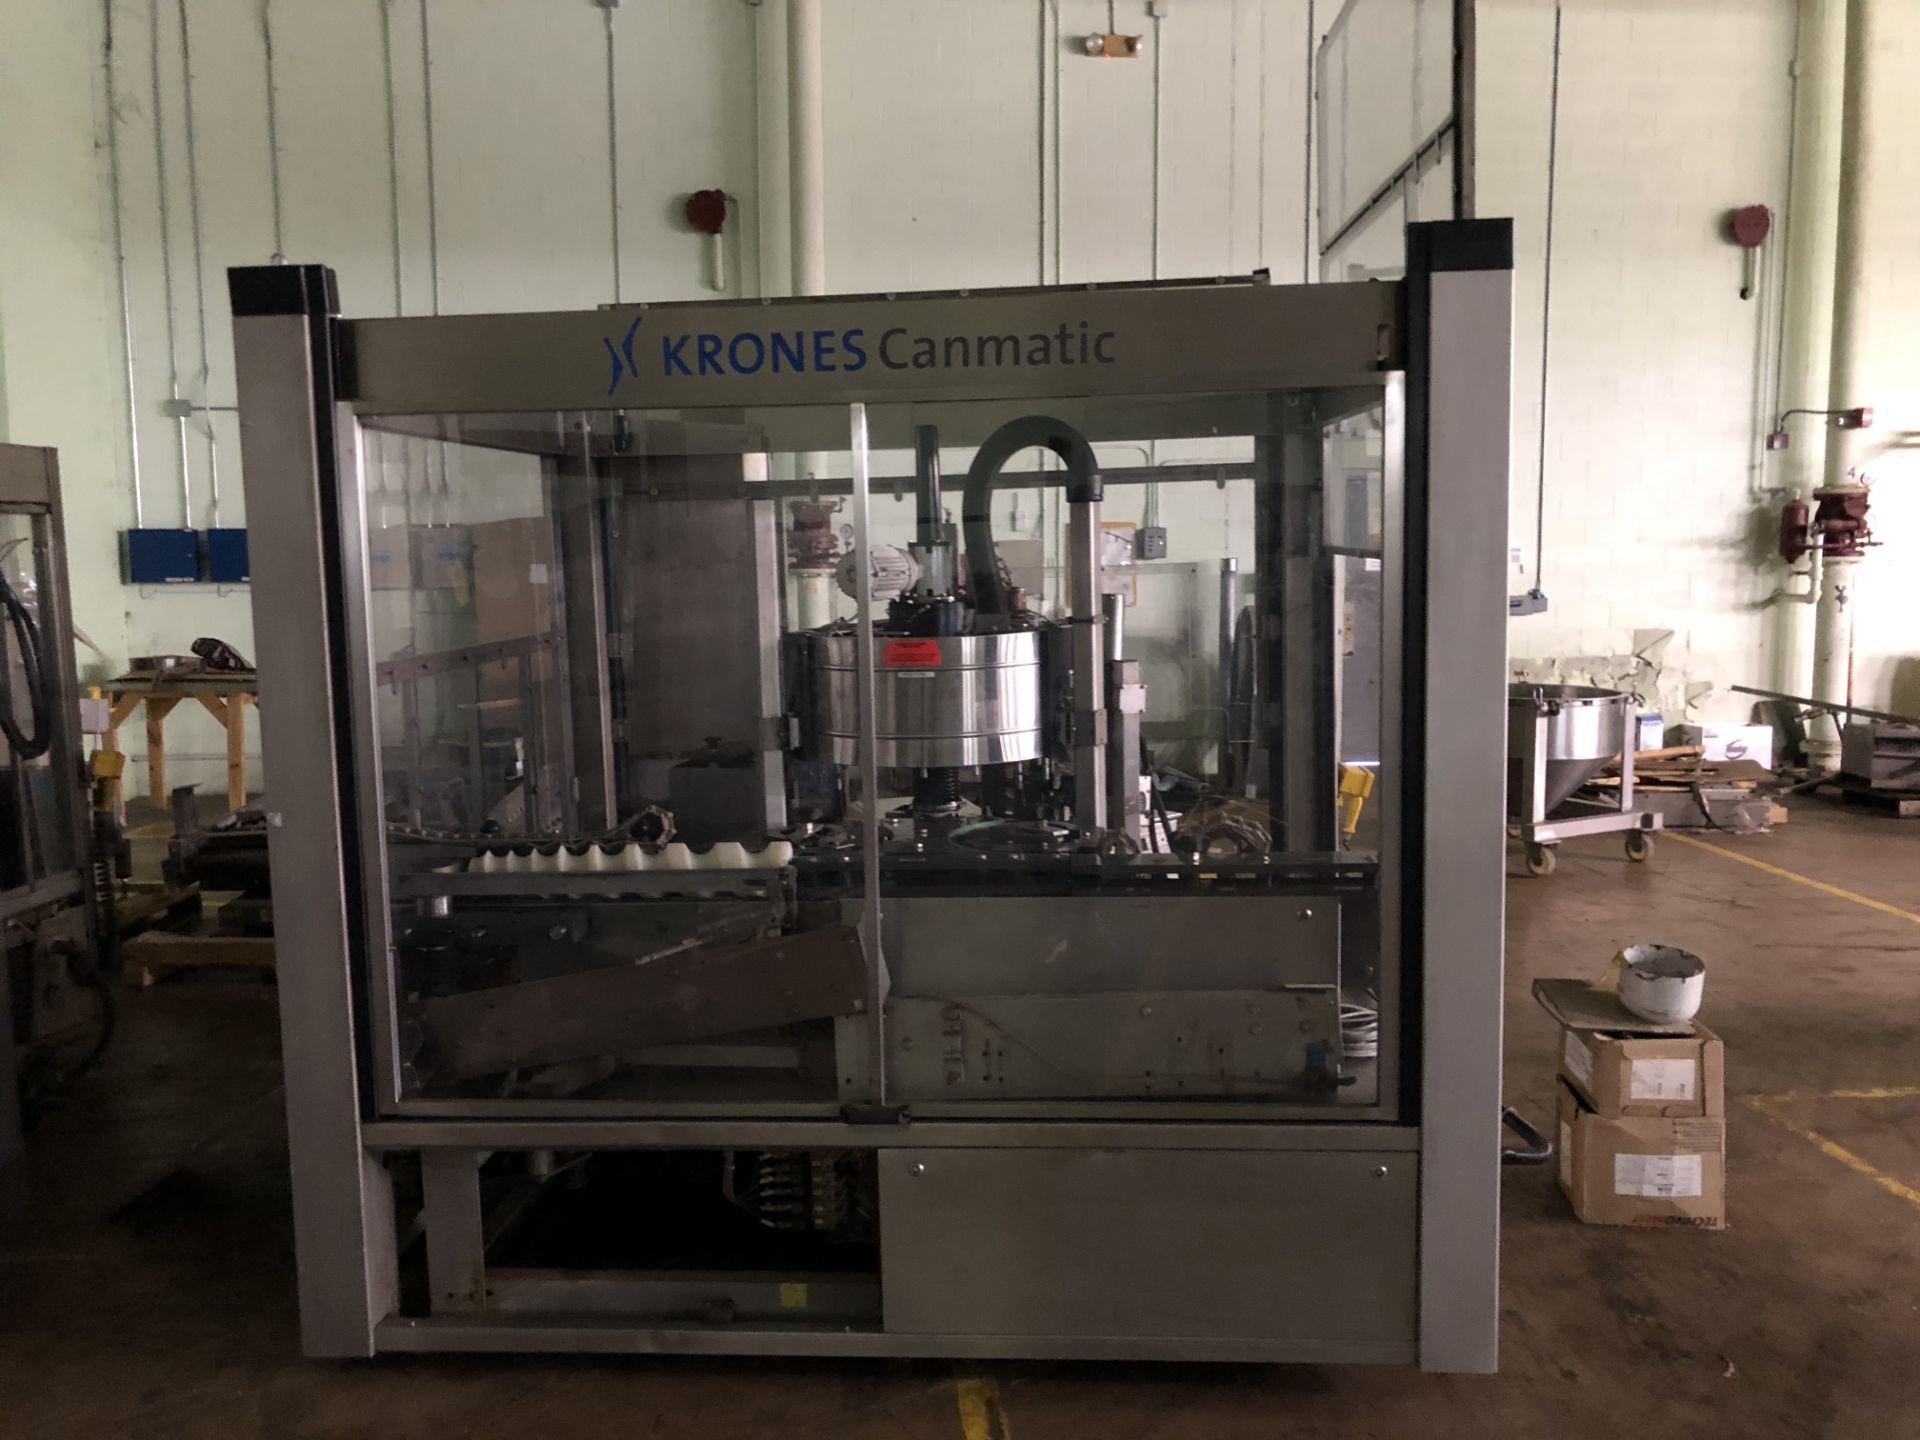 Krones Canmatic Labeler, Machine #073-Q83, RIGGING FEE - $1750 - Image 4 of 5